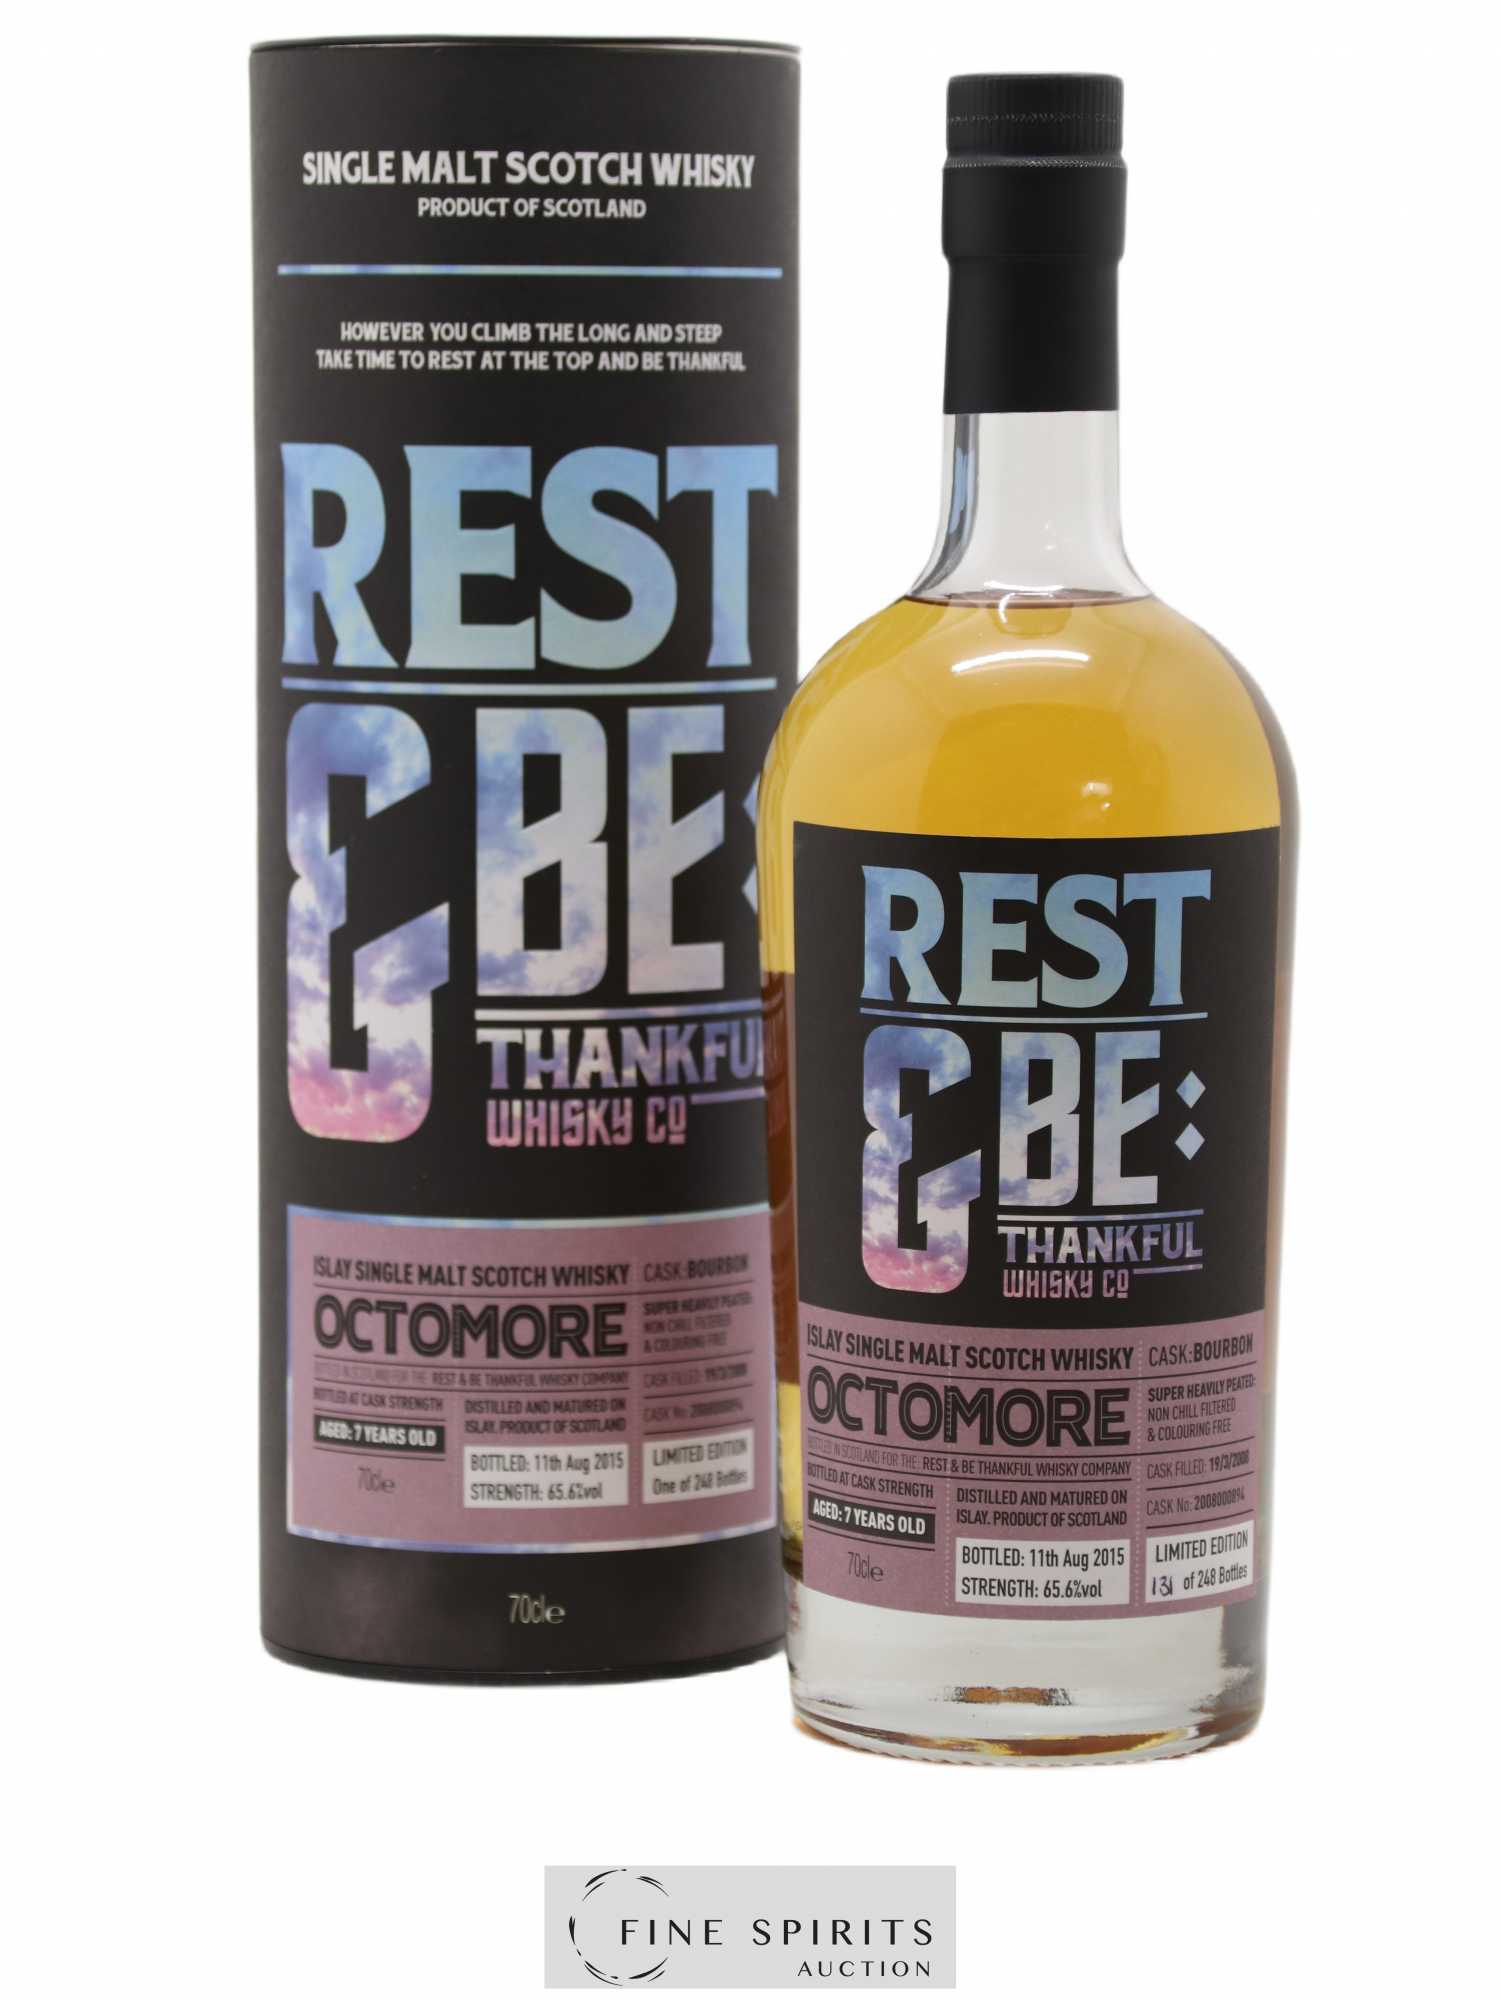 Octomore 7 years 2008 Rest & Be Thankful Bourbon Cask n°2008000894 - One of 248 - bottled 2015 Limited Edition 